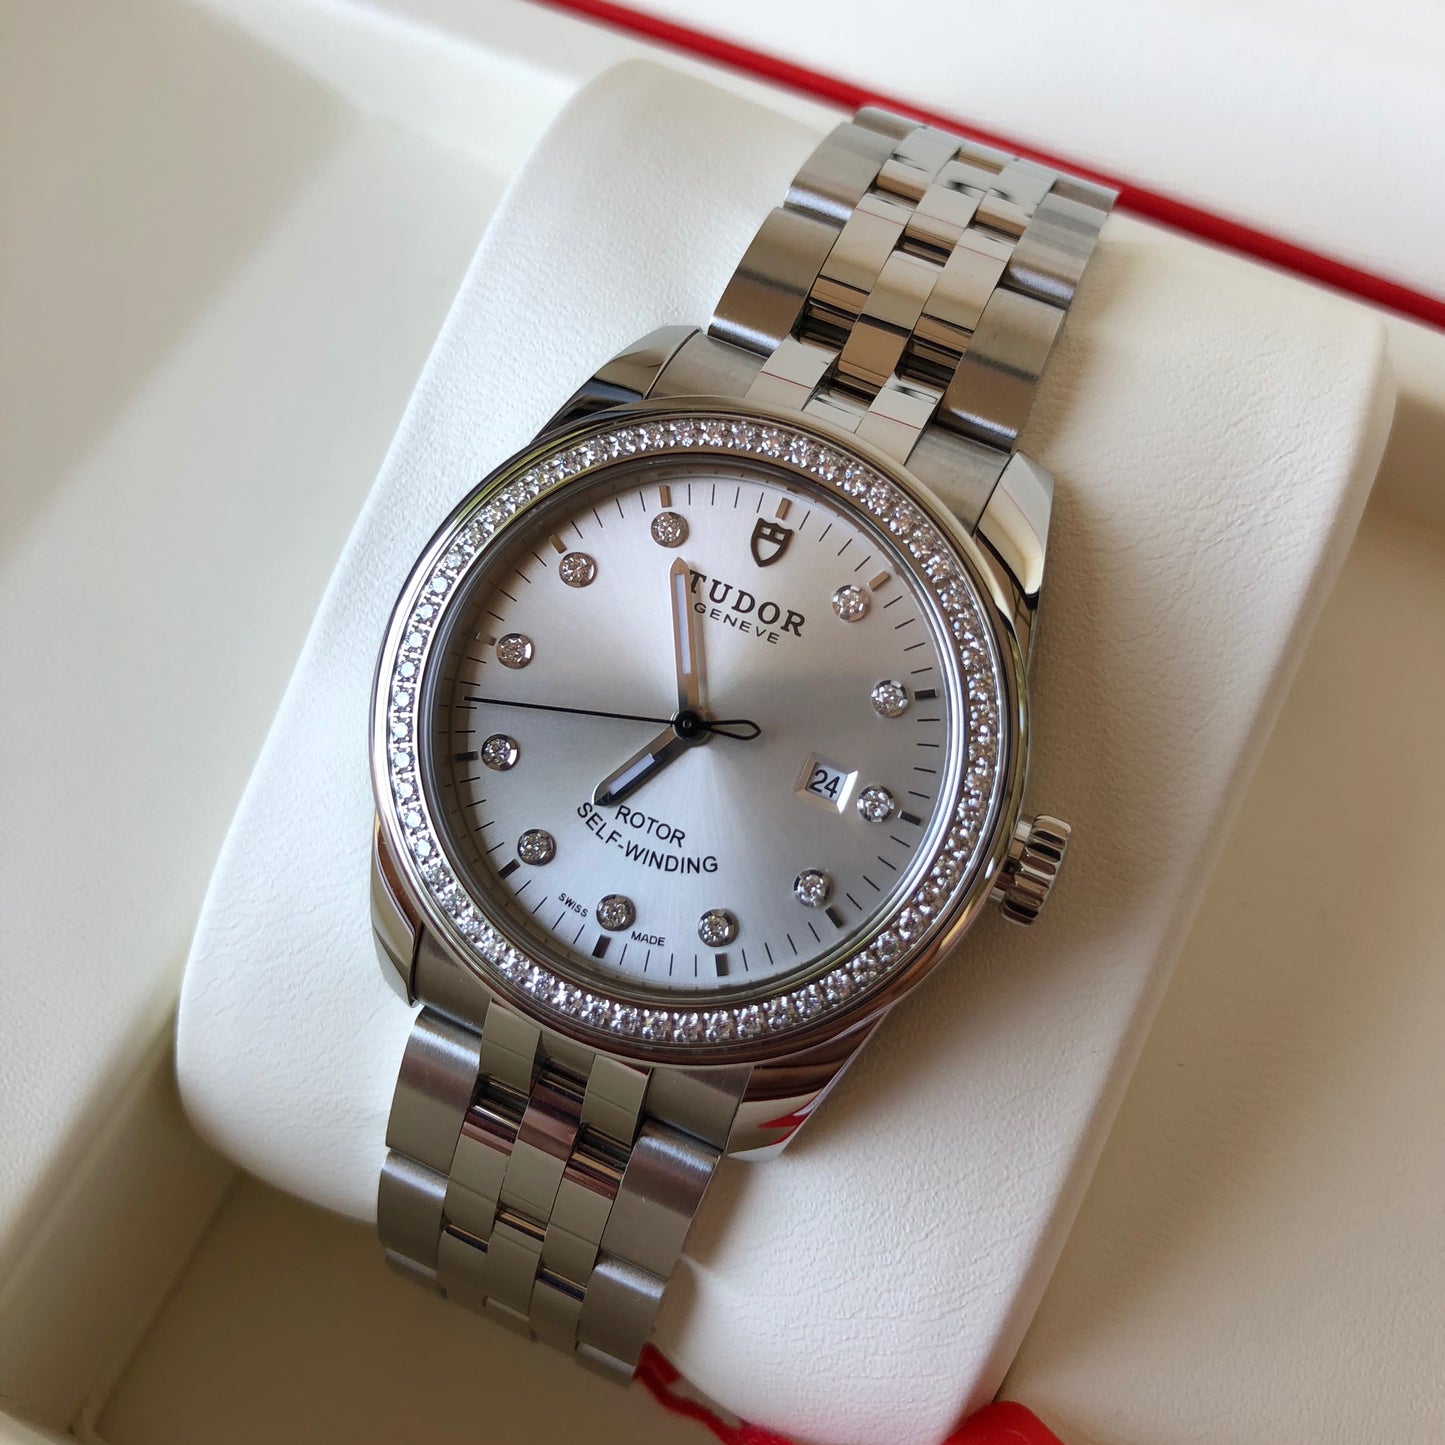 Tudor Glamour Date 31 53020 Silver Diamond Dial Bezel Stainless Steel Automatic Ladies Wristwatch - Hashtag Watch Company